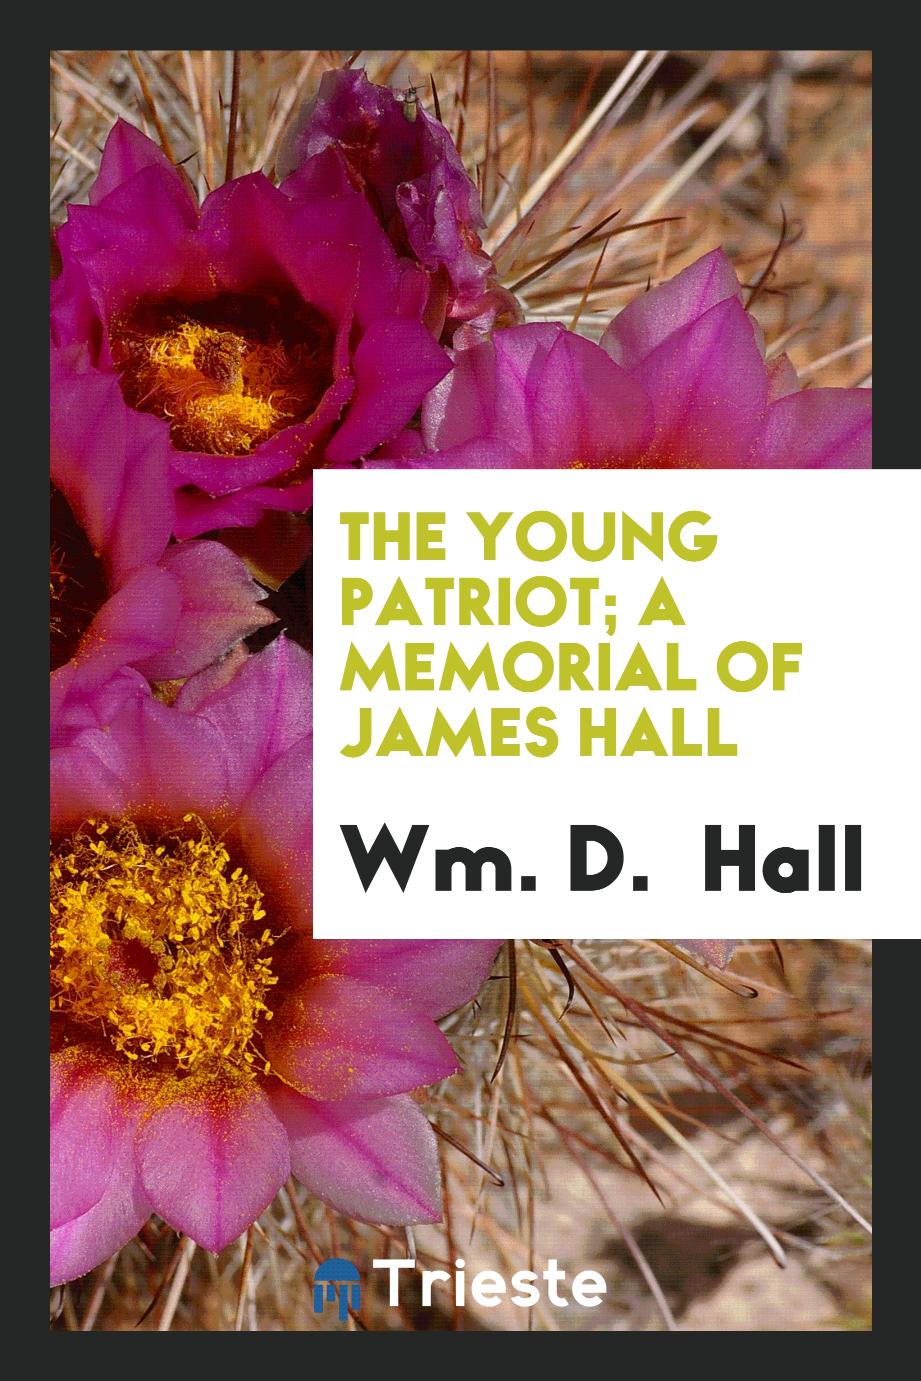 The young patriot; a memorial of James Hall